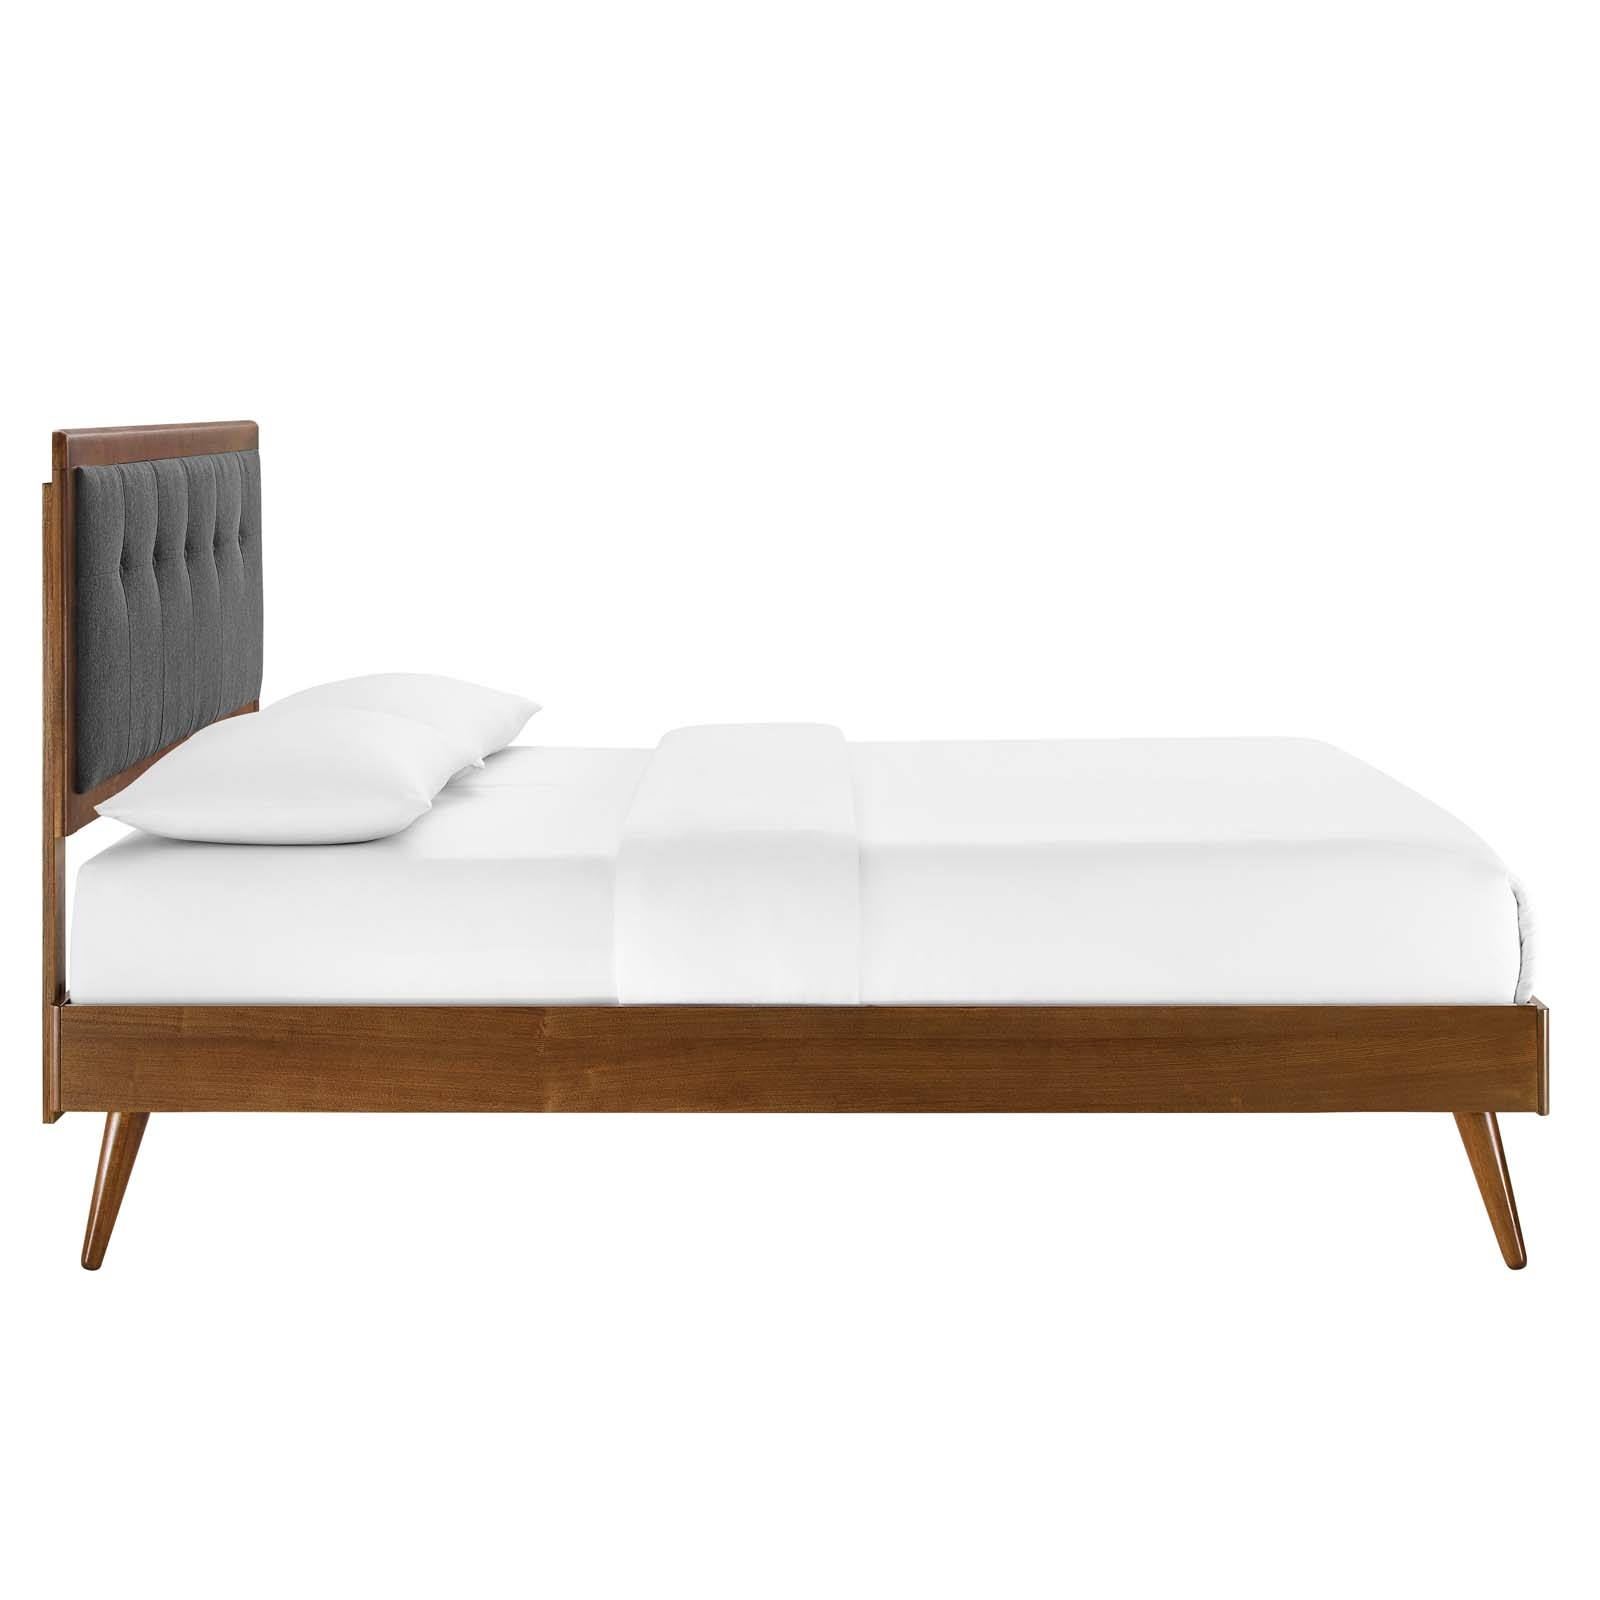 Willow King Wood Platform Bed With Splayed Legs, Walnut Charcoal